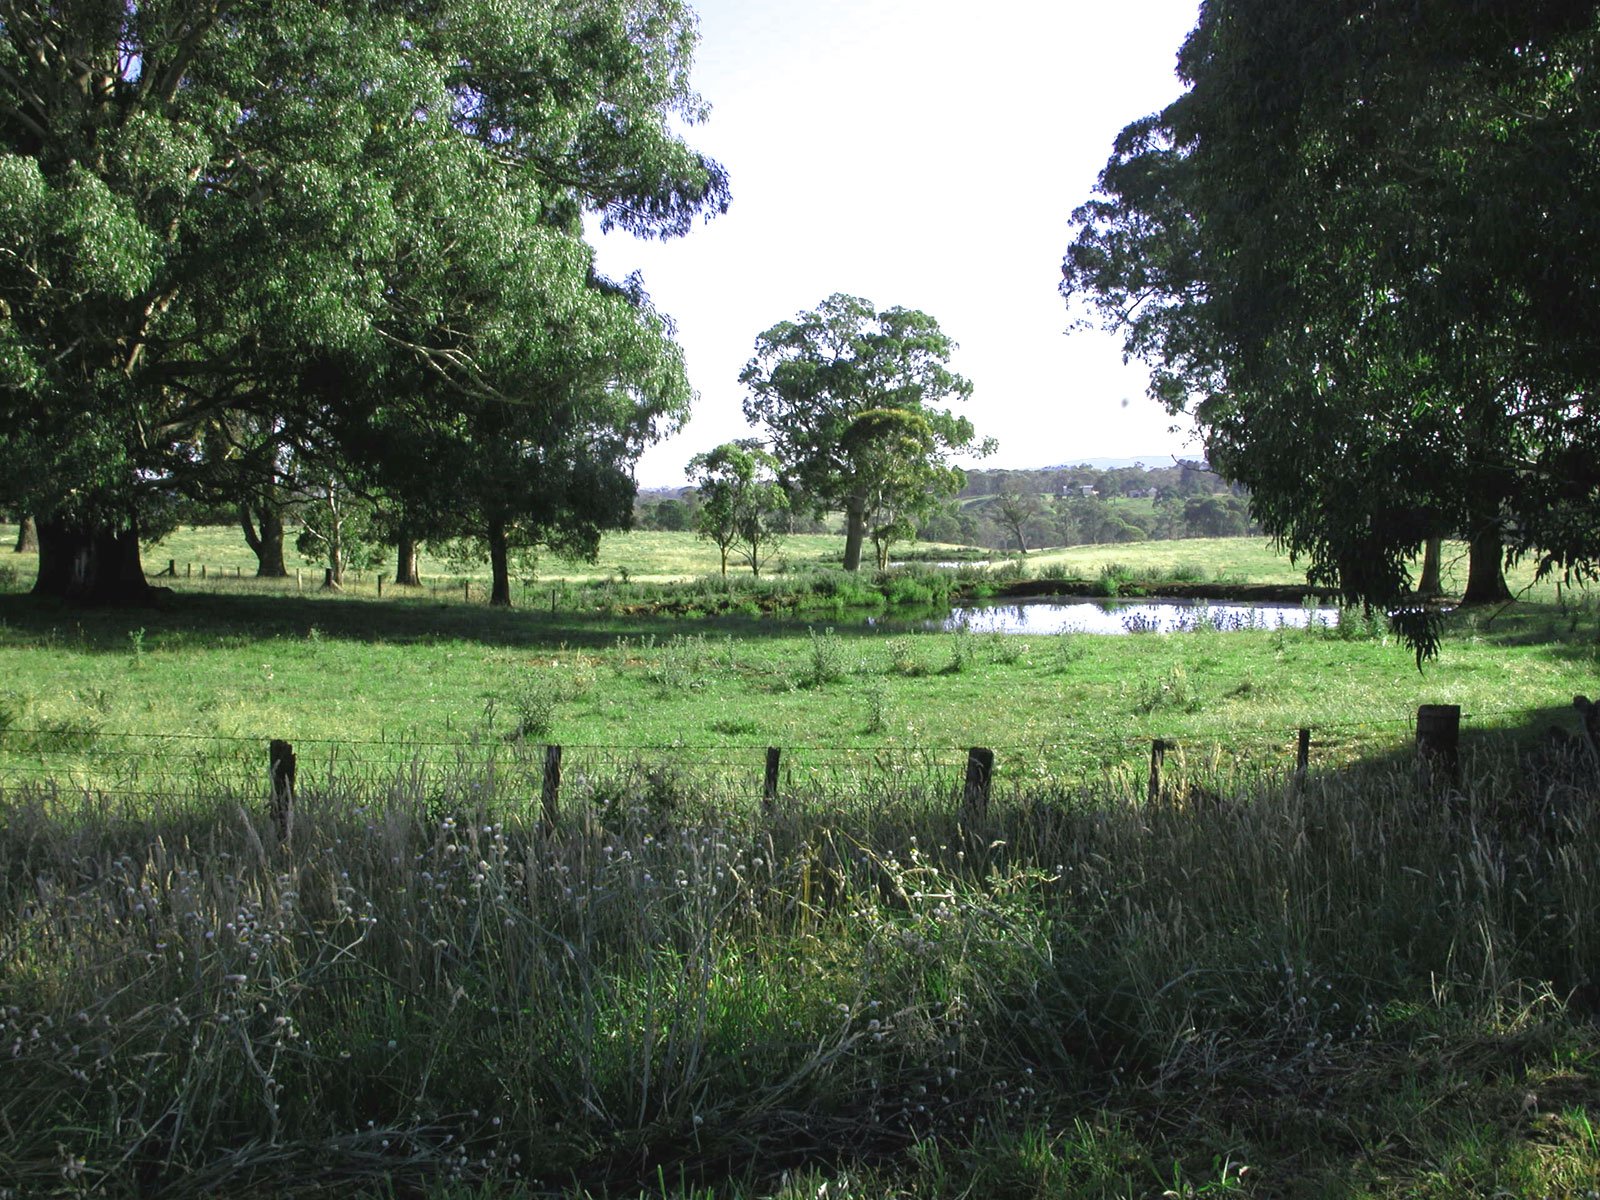 a pasture is shown with trees near by